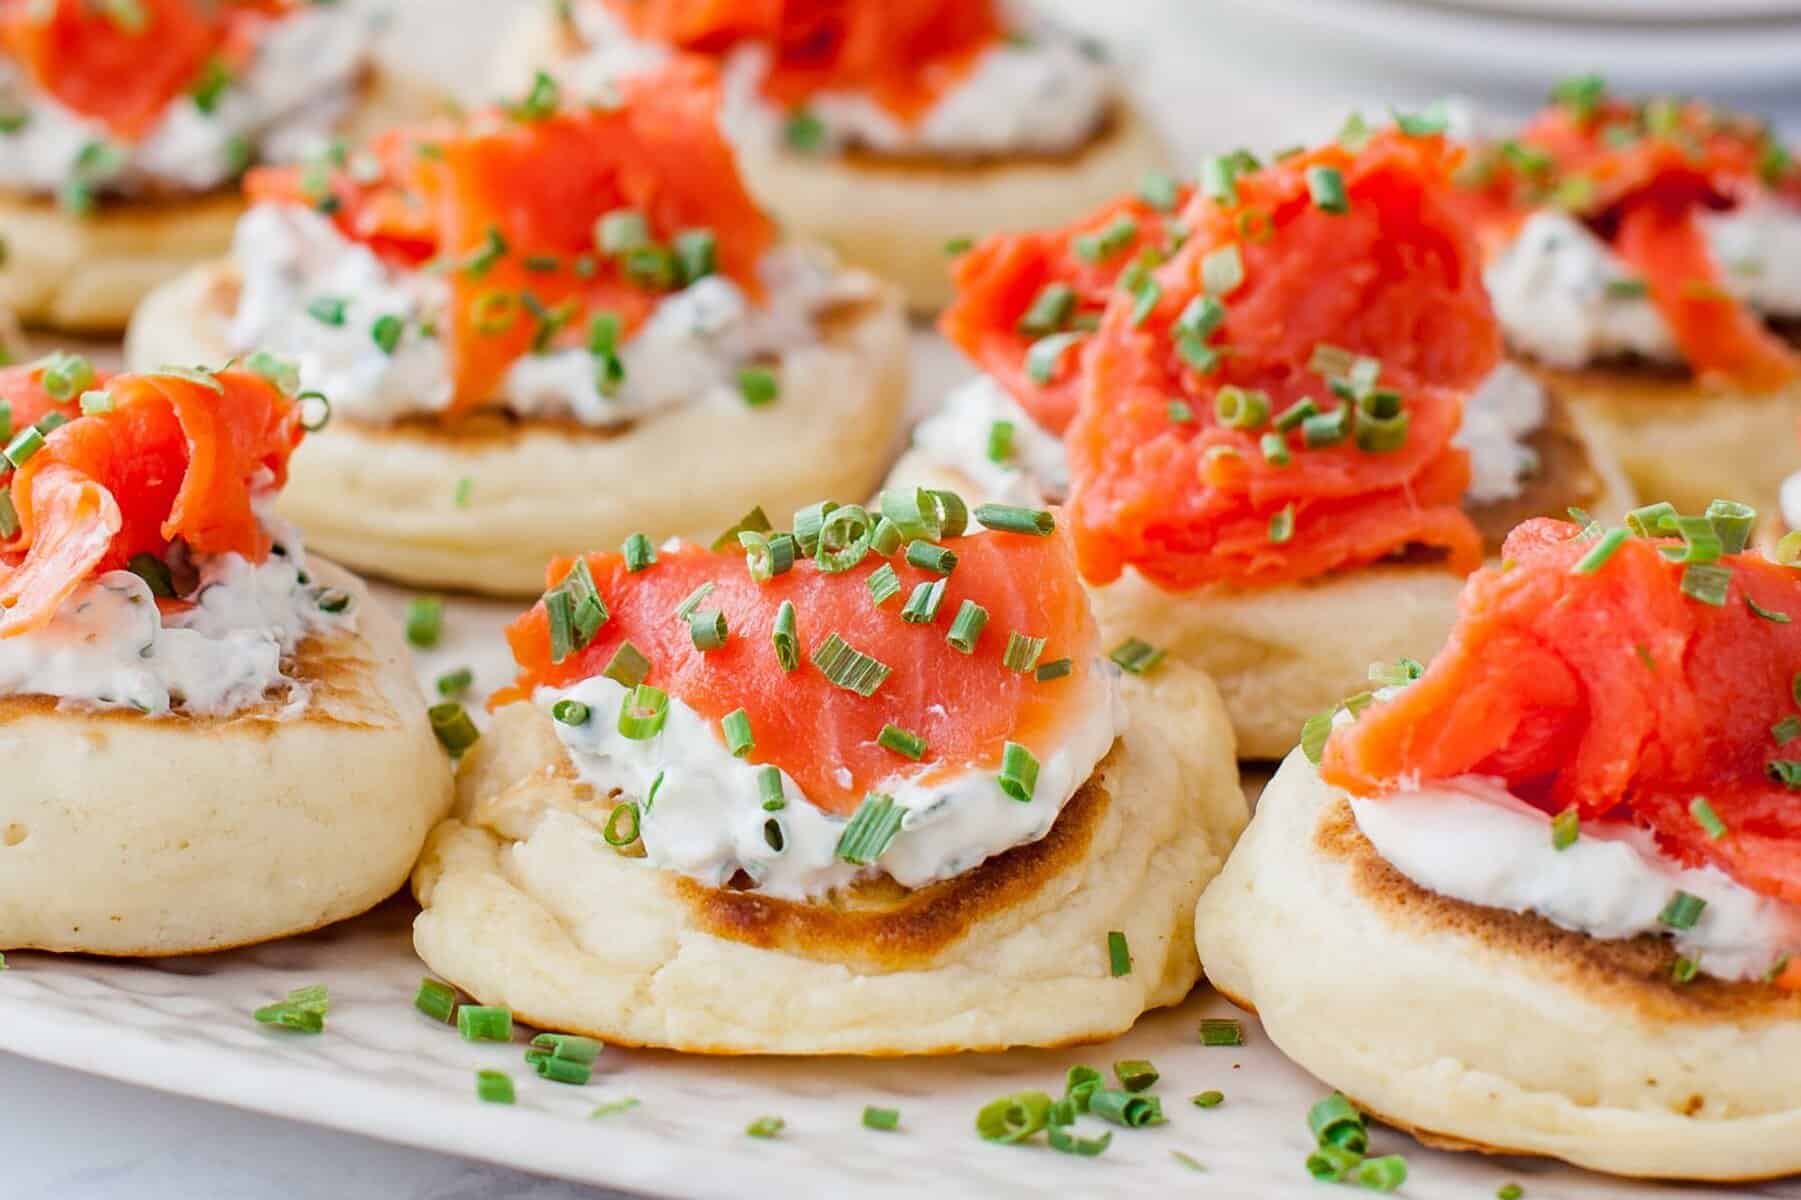  These fluffy pancakes are made with mashed potatoes, smoked salmon, and chives for a delicious twist on the classic breakfast dish.